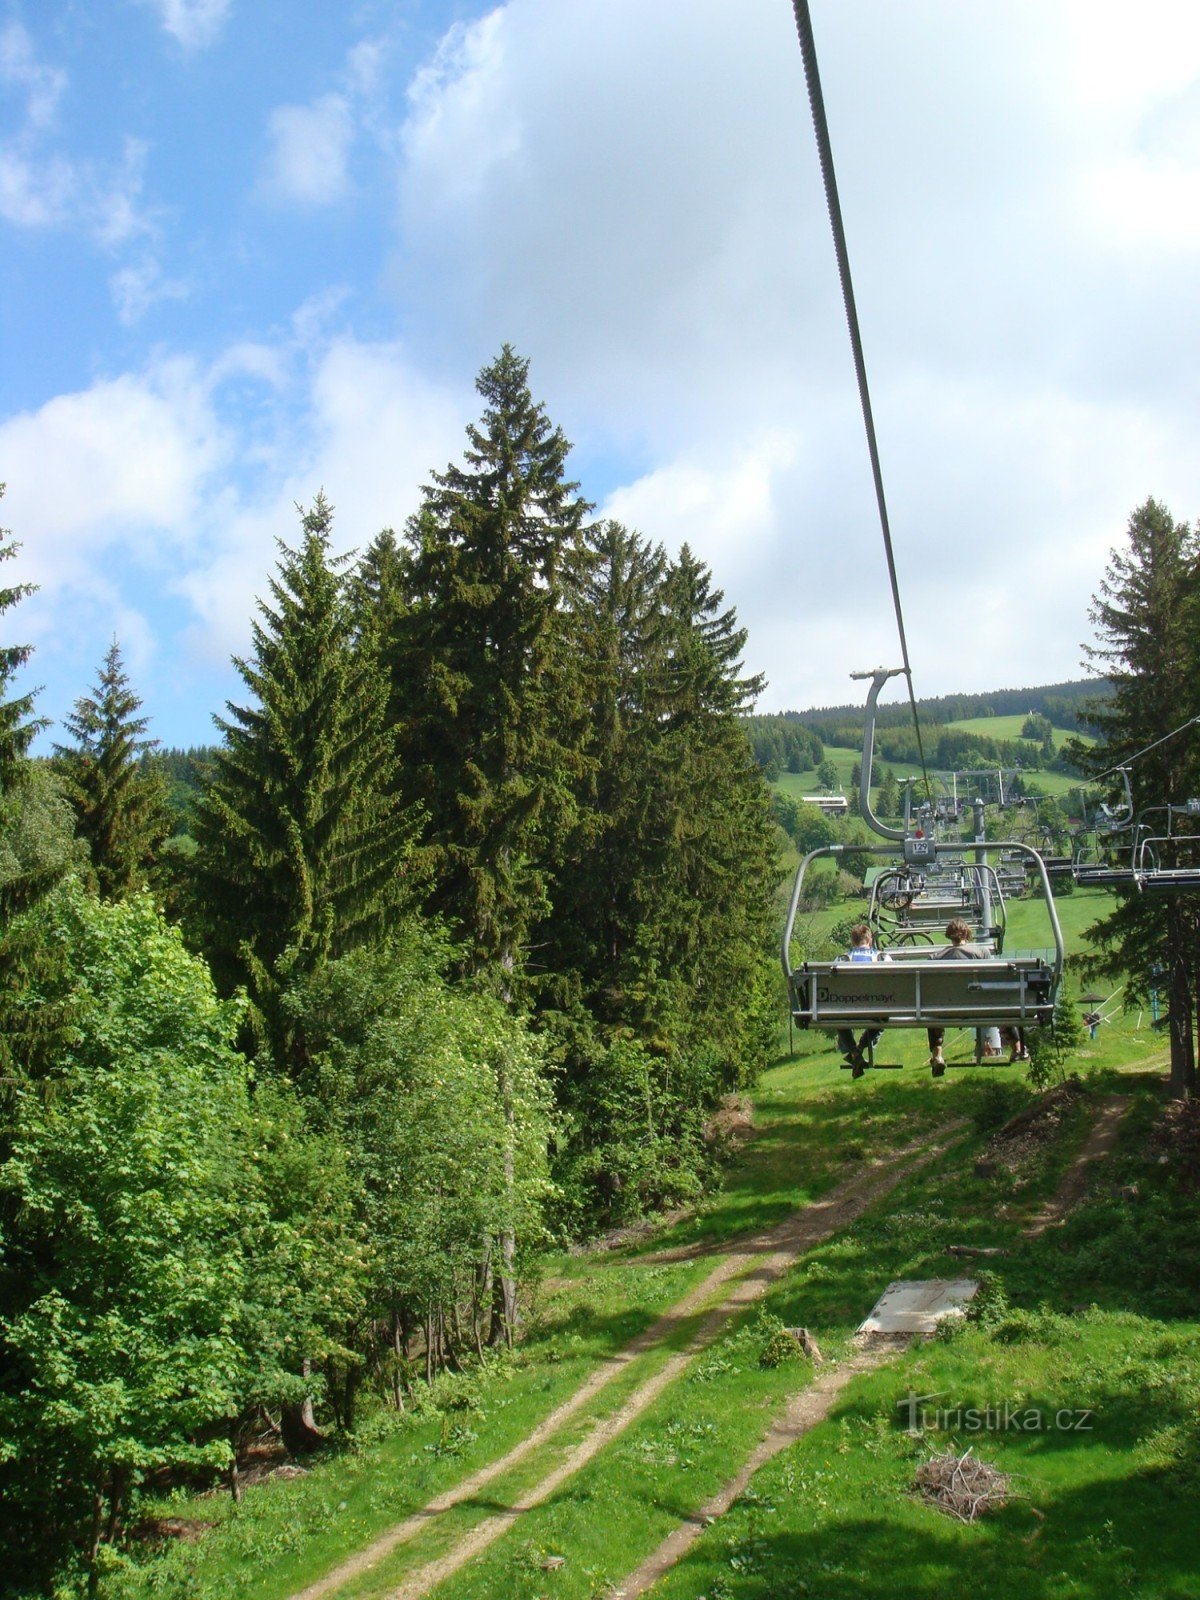 view from the cable car